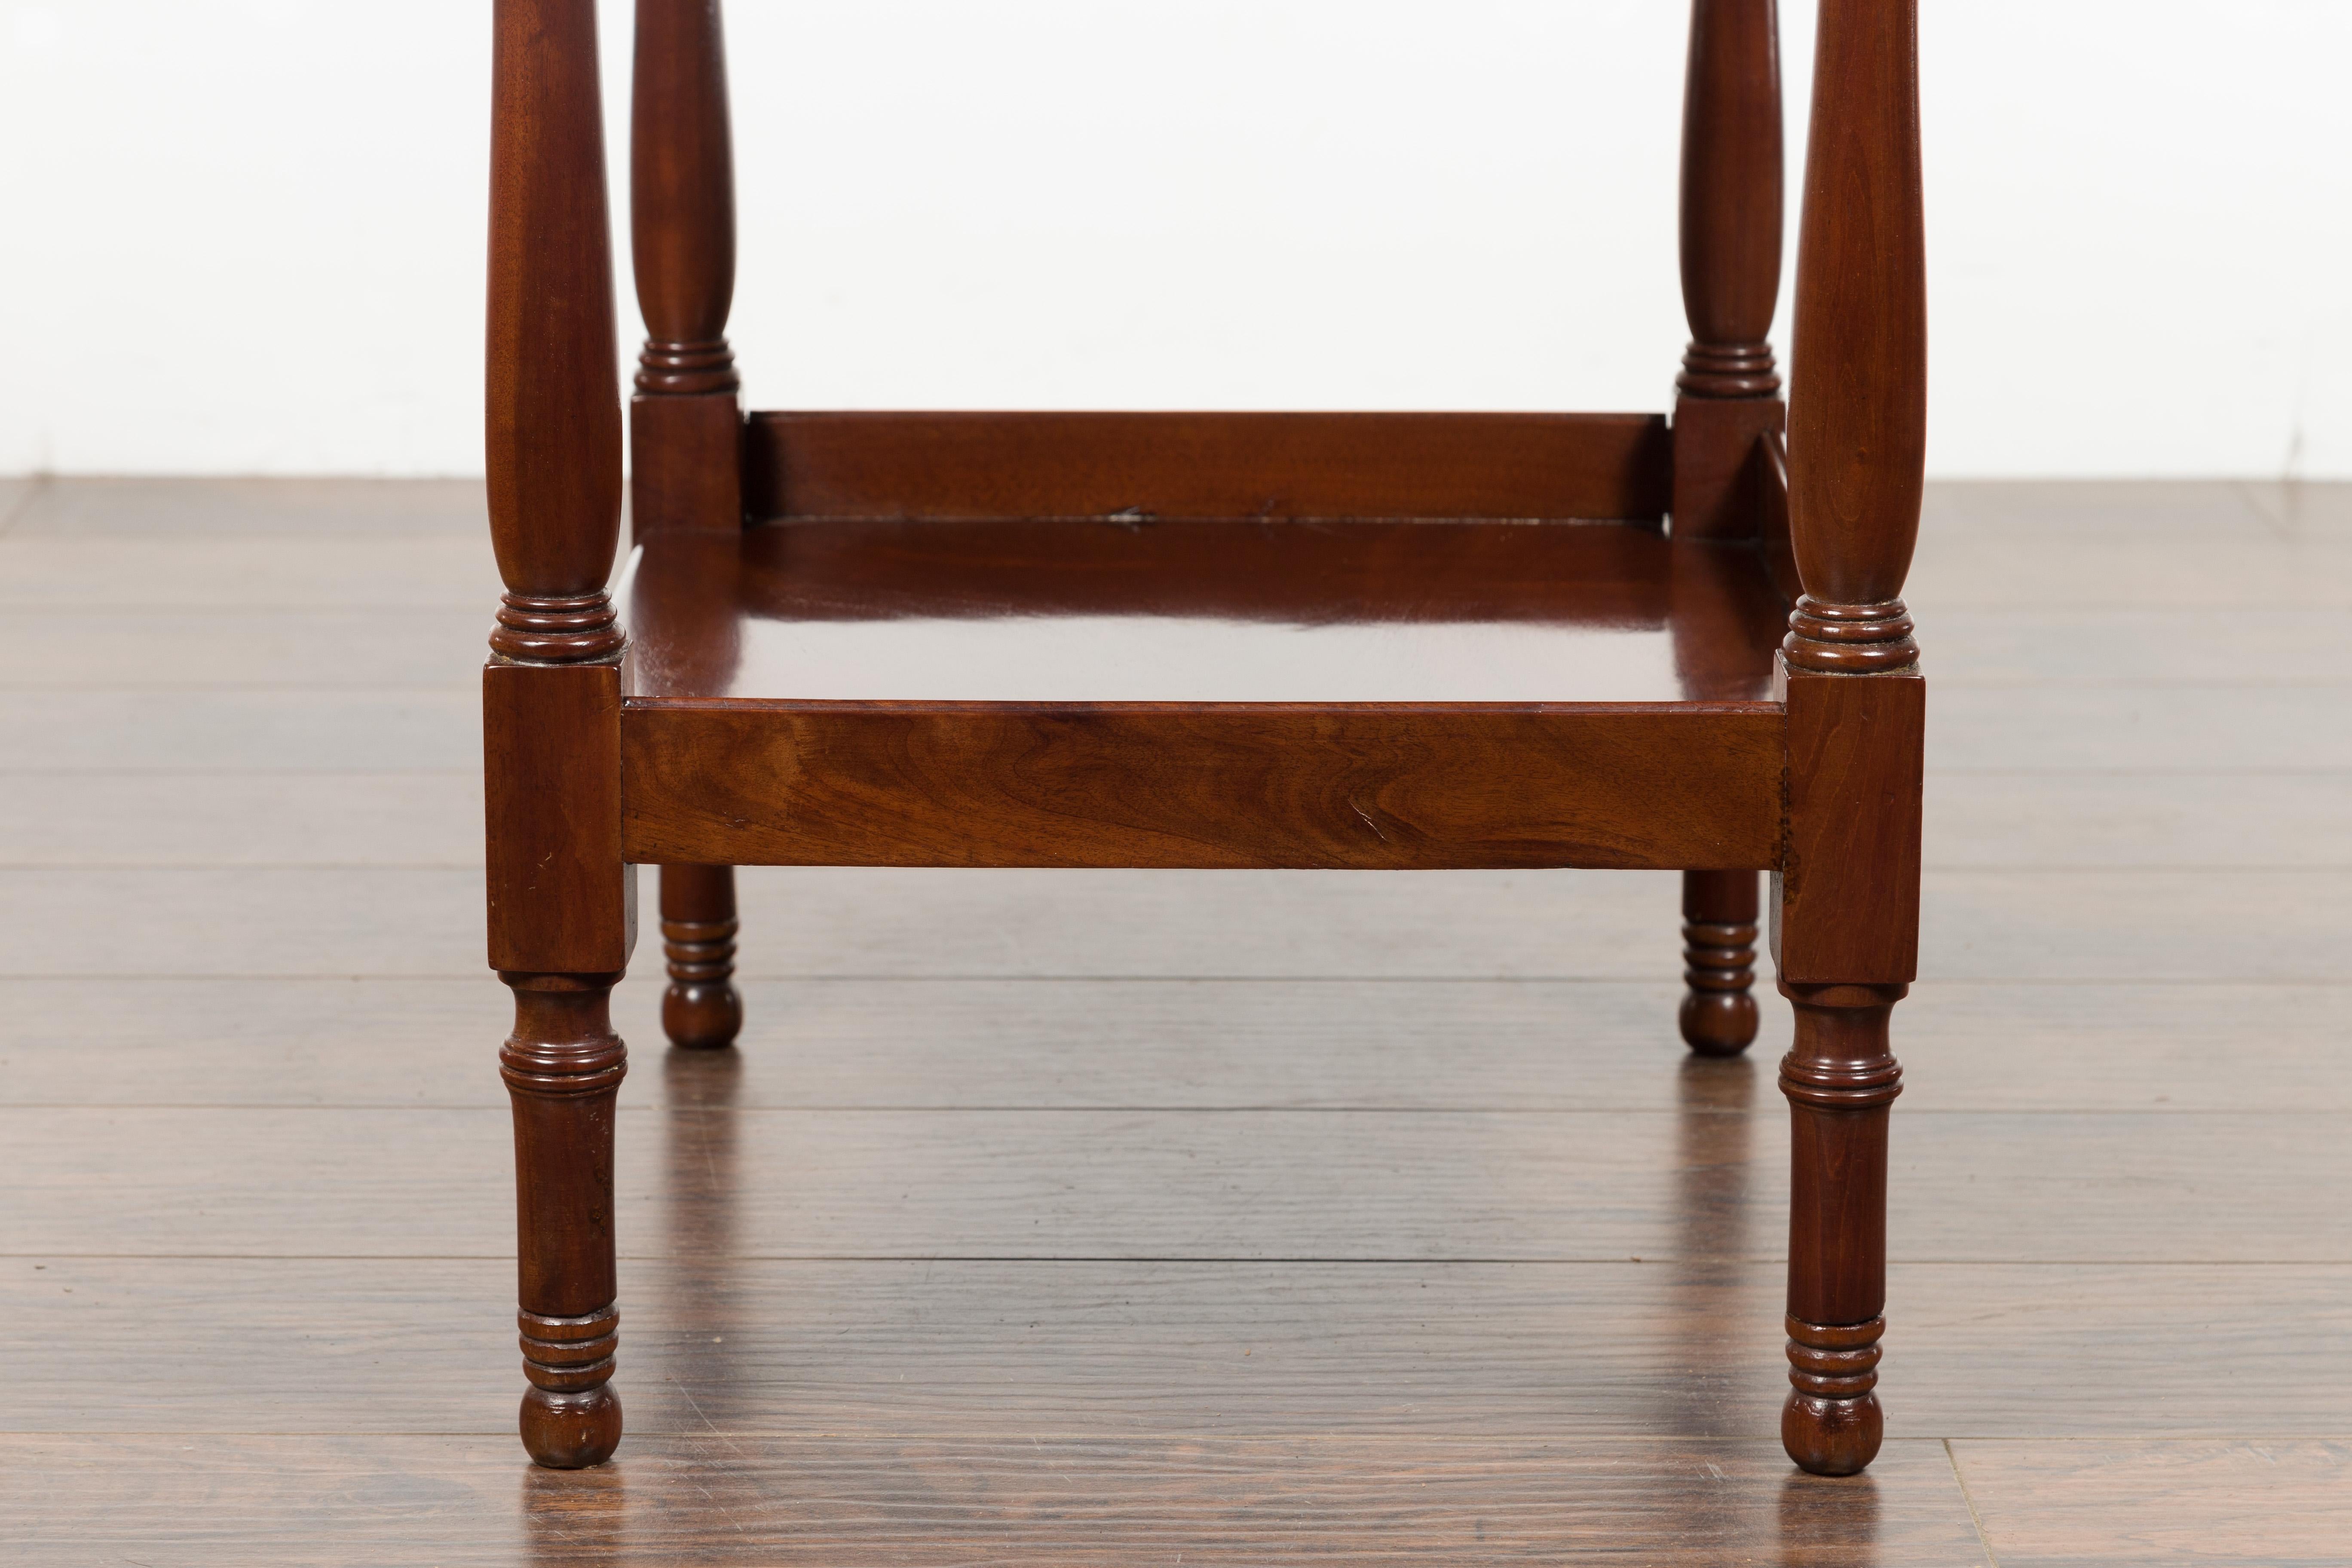 English 1870s Mahogany Tiered Table with Turned Legs and Low Shelf and Finials 12